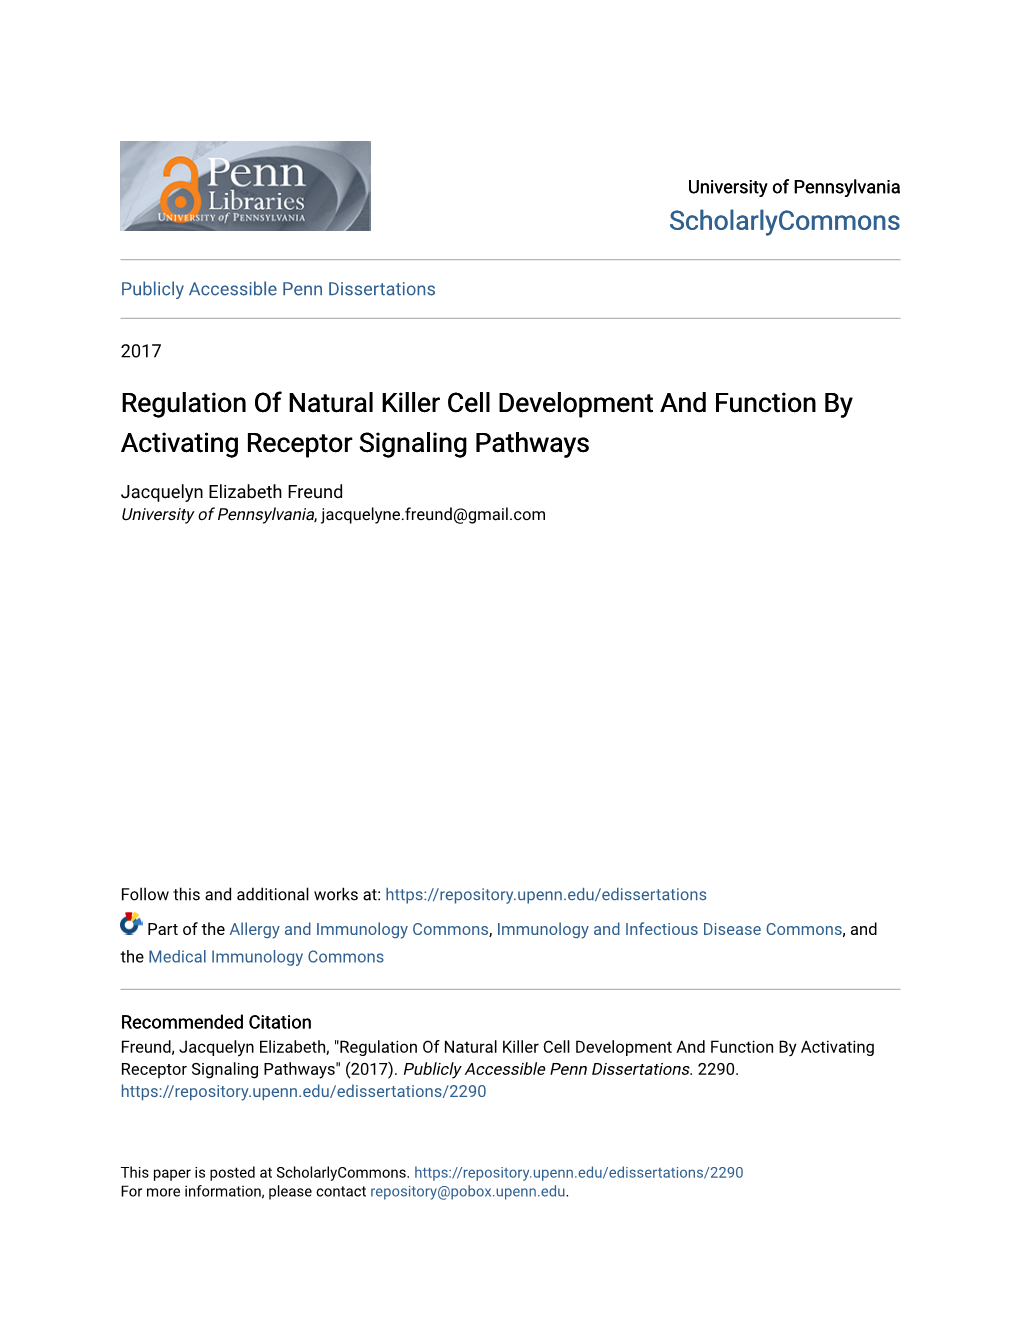 Regulation of Natural Killer Cell Development and Function by Activating Receptor Signaling Pathways